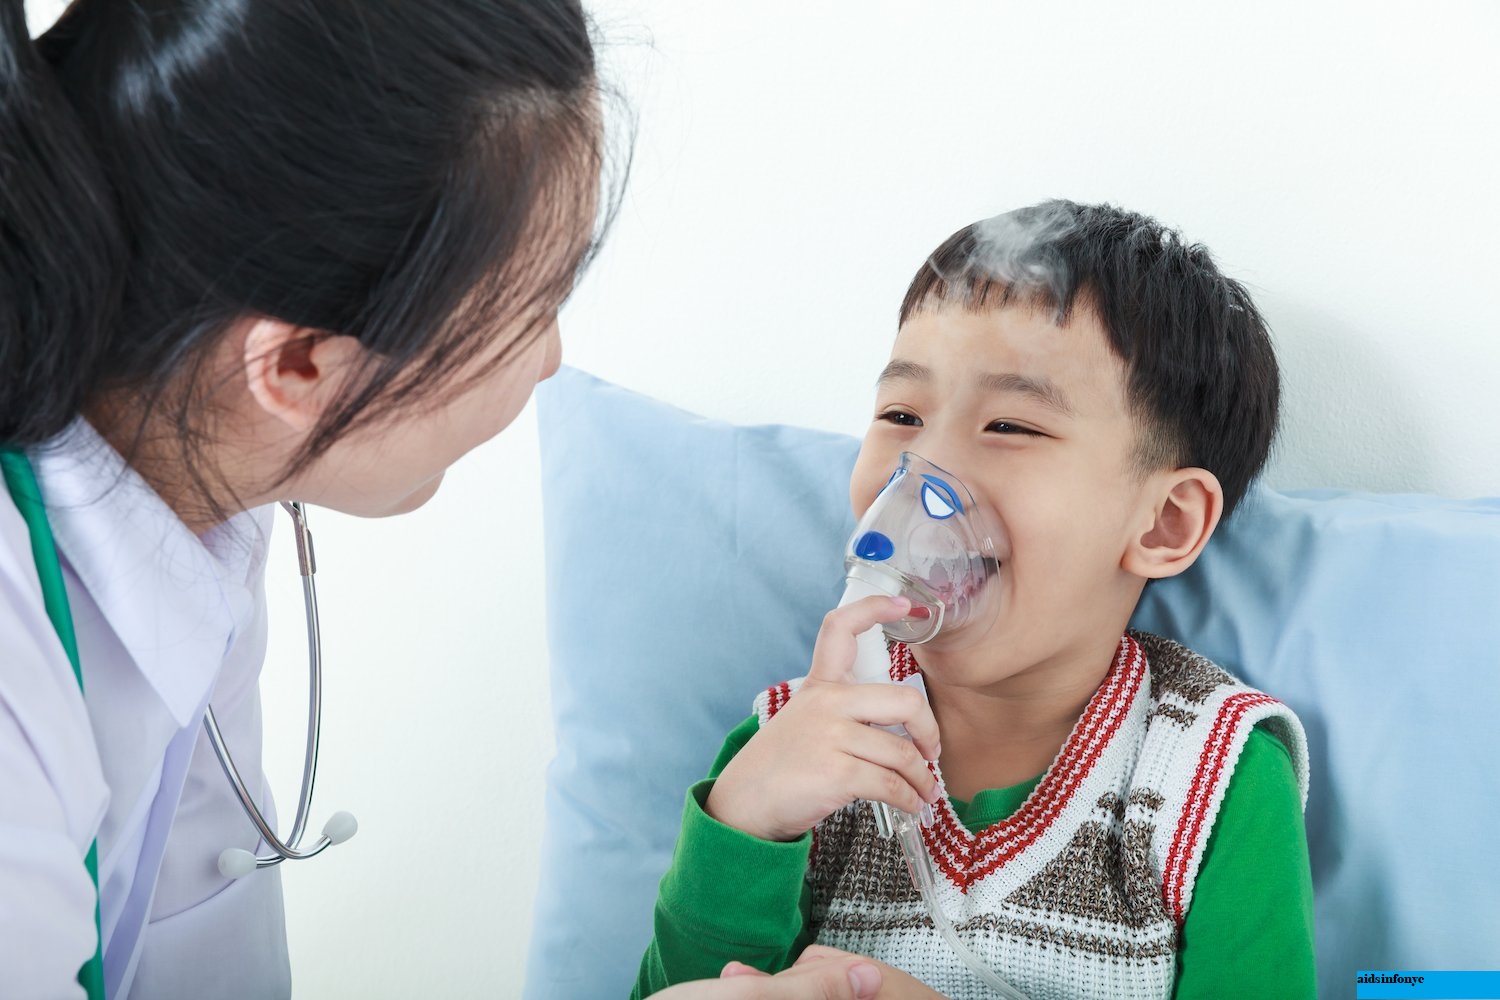 Medical aids : Nebulizers